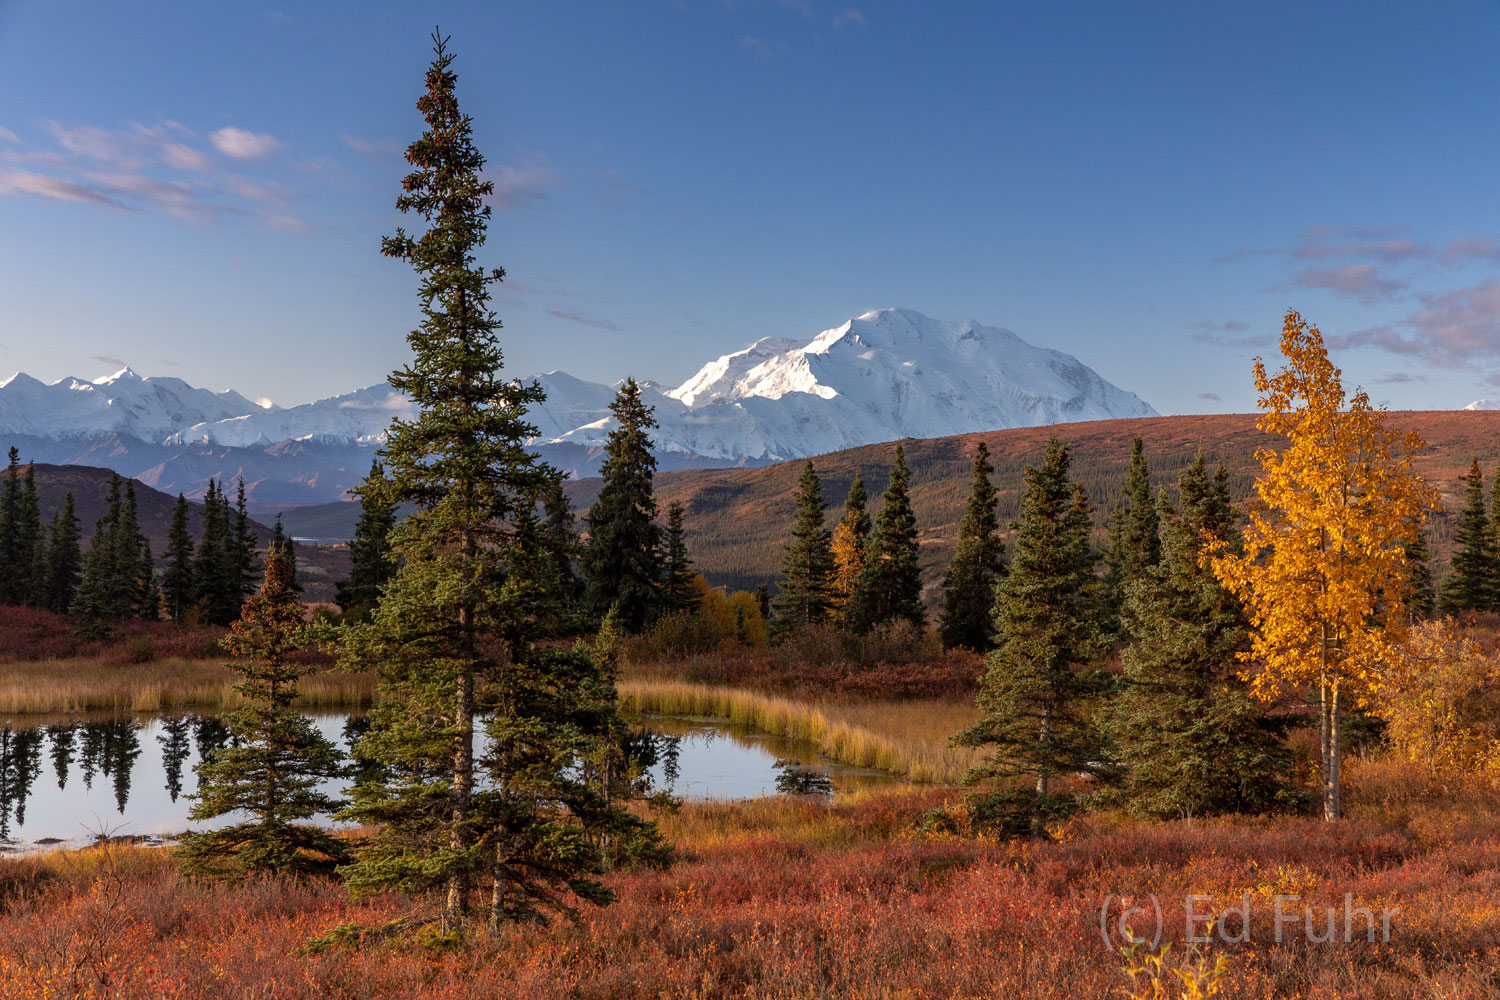 Golden leaves, red berry bushes, blue skies and a clear view of Mount Denali